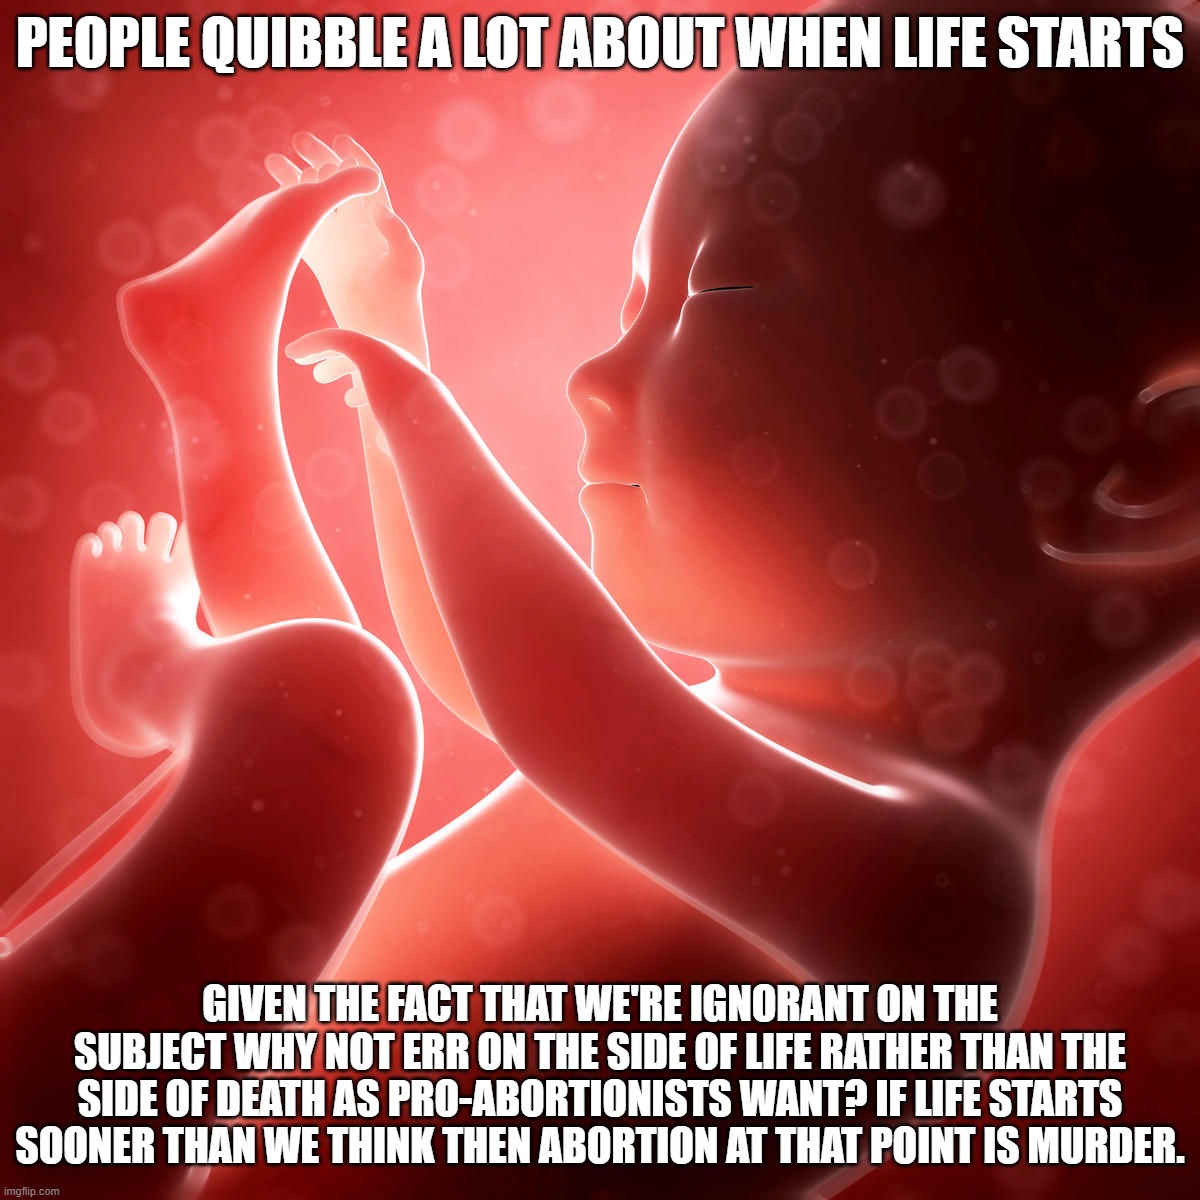 You Should Err On The Side of Life | PEOPLE QUIBBLE A LOT ABOUT WHEN LIFE STARTS; GIVEN THE FACT THAT WE'RE IGNORANT ON THE SUBJECT WHY NOT ERR ON THE SIDE OF LIFE RATHER THAN THE SIDE OF DEATH AS PRO-ABORTIONISTS WANT? IF LIFE STARTS SOONER THAN WE THINK THEN ABORTION AT THAT POINT IS MURDER. | image tagged in baby fetus,abortion,murder,life | made w/ Imgflip meme maker